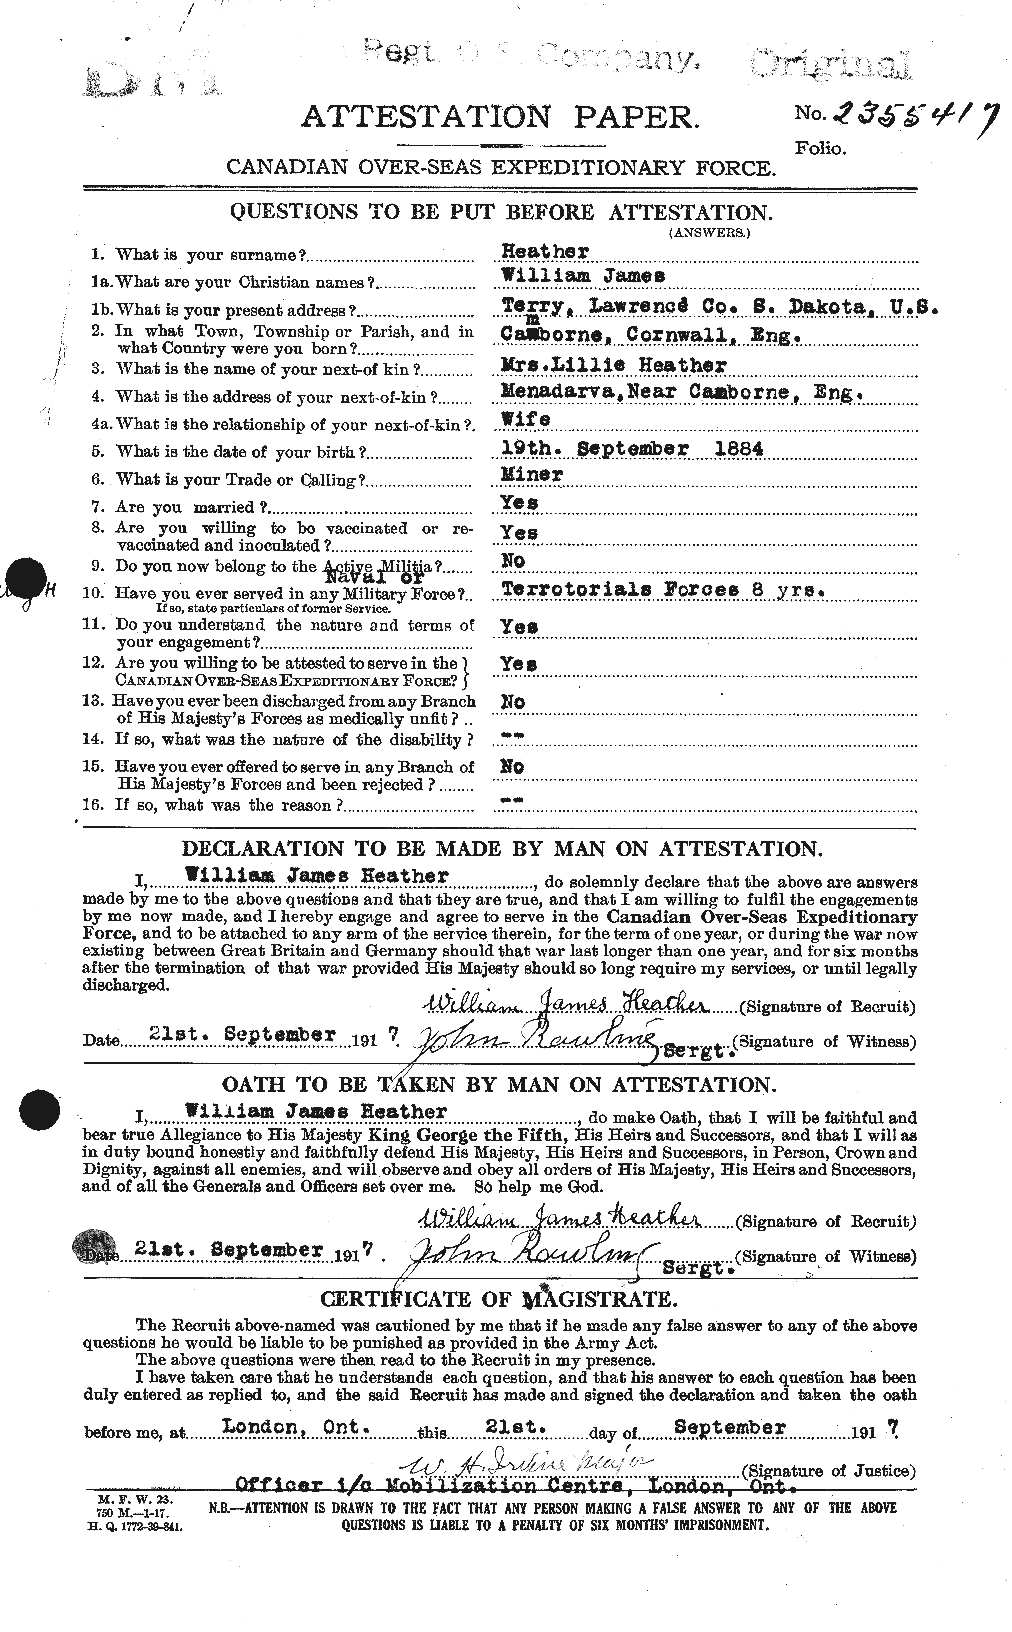 Personnel Records of the First World War - CEF 386383a